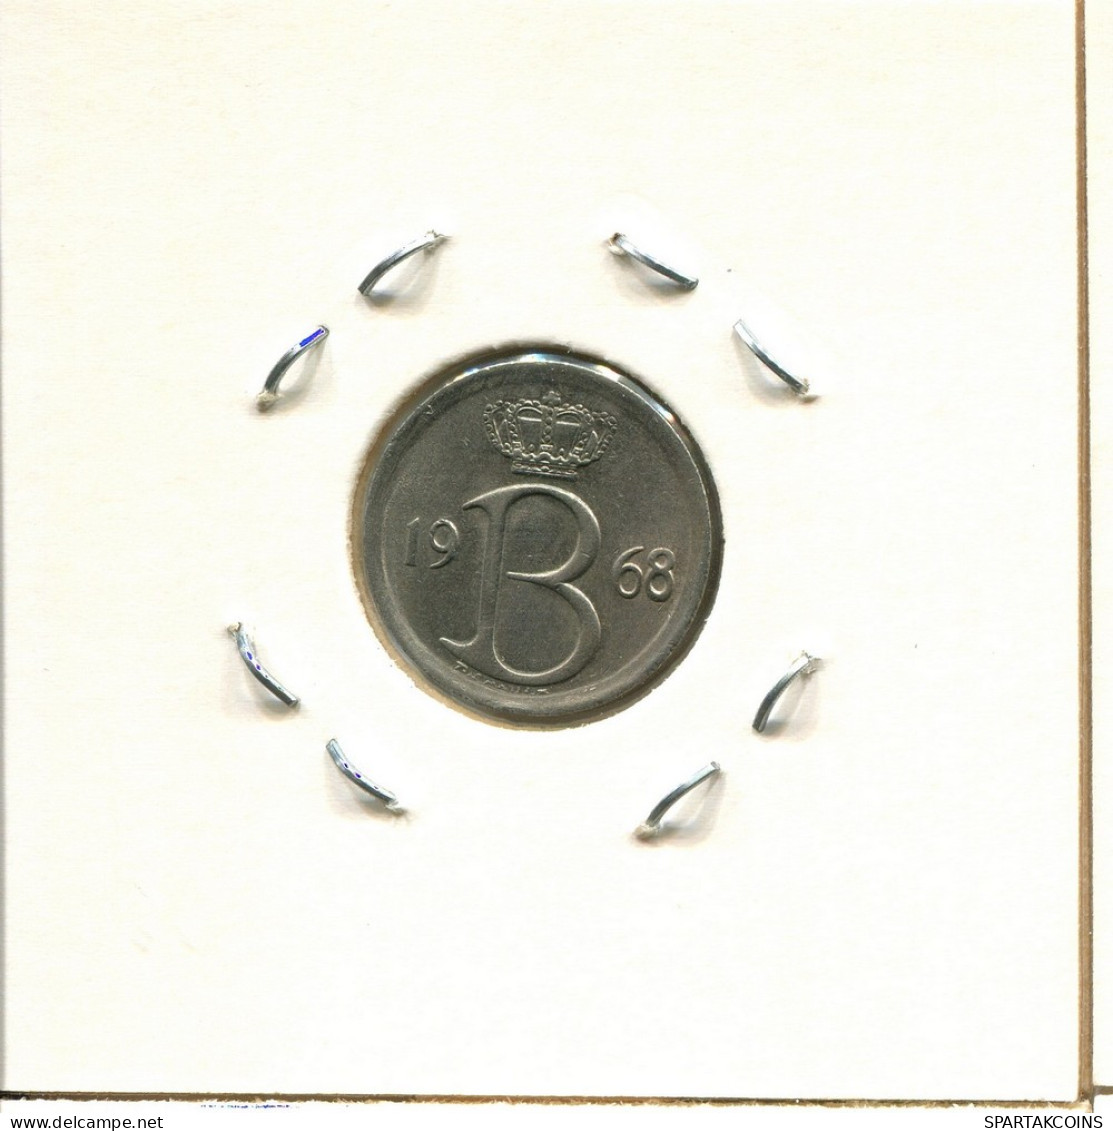 25 CENTIMES 1968 FRENCH Text BELGIUM Coin #BA330.U - 25 Cent